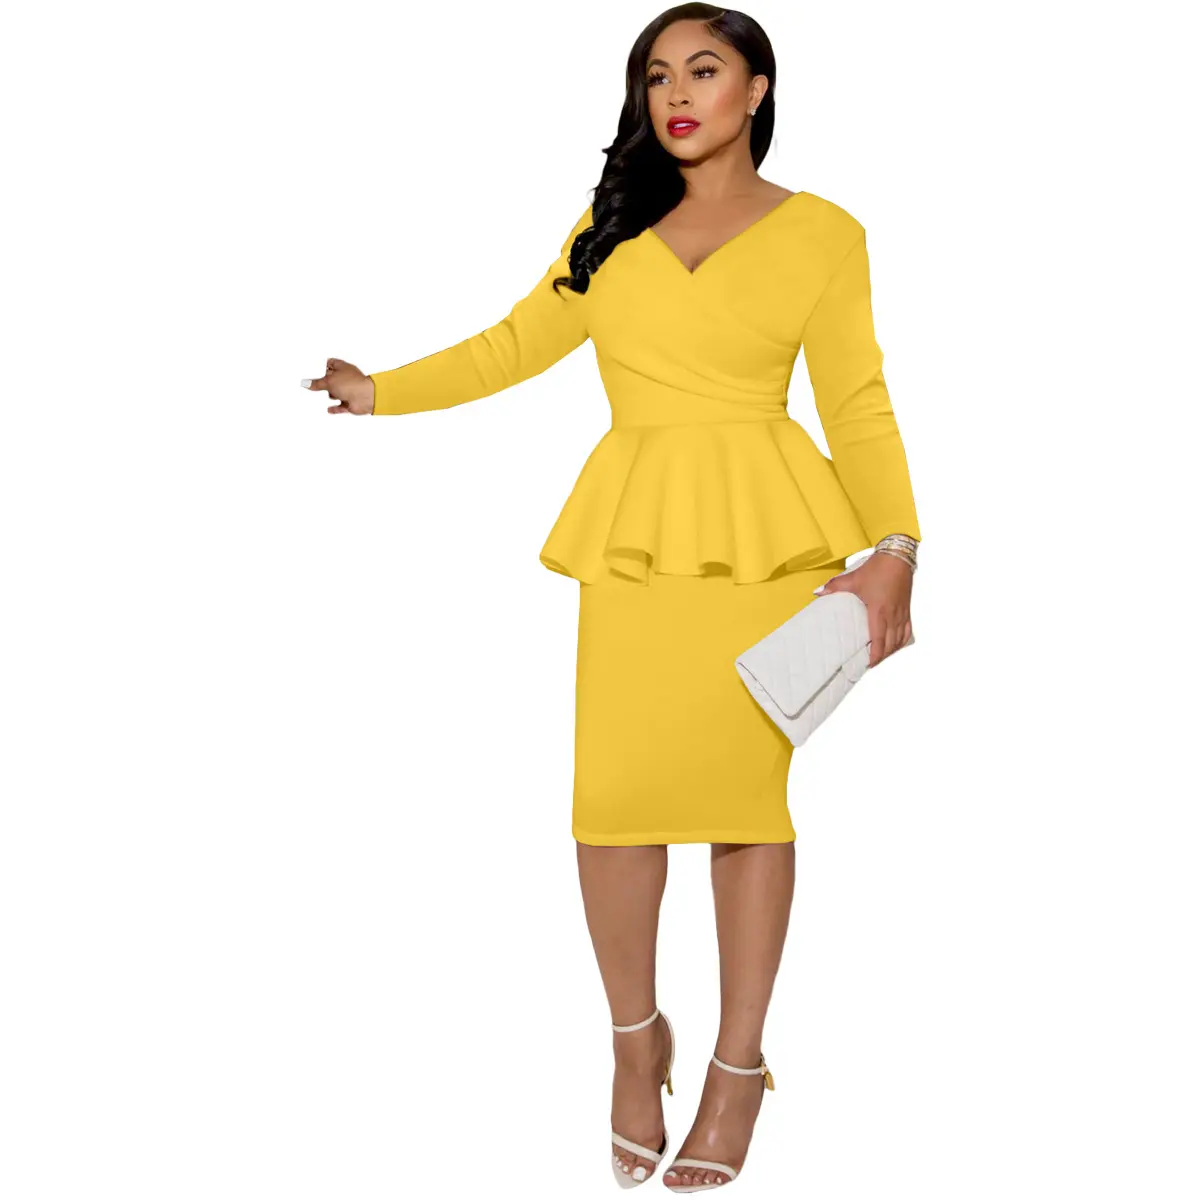 Women Lady Long Sleeve V-neck Vintage Elegant Dresses Wear To Work Business Party Office Women Casual Party Dress